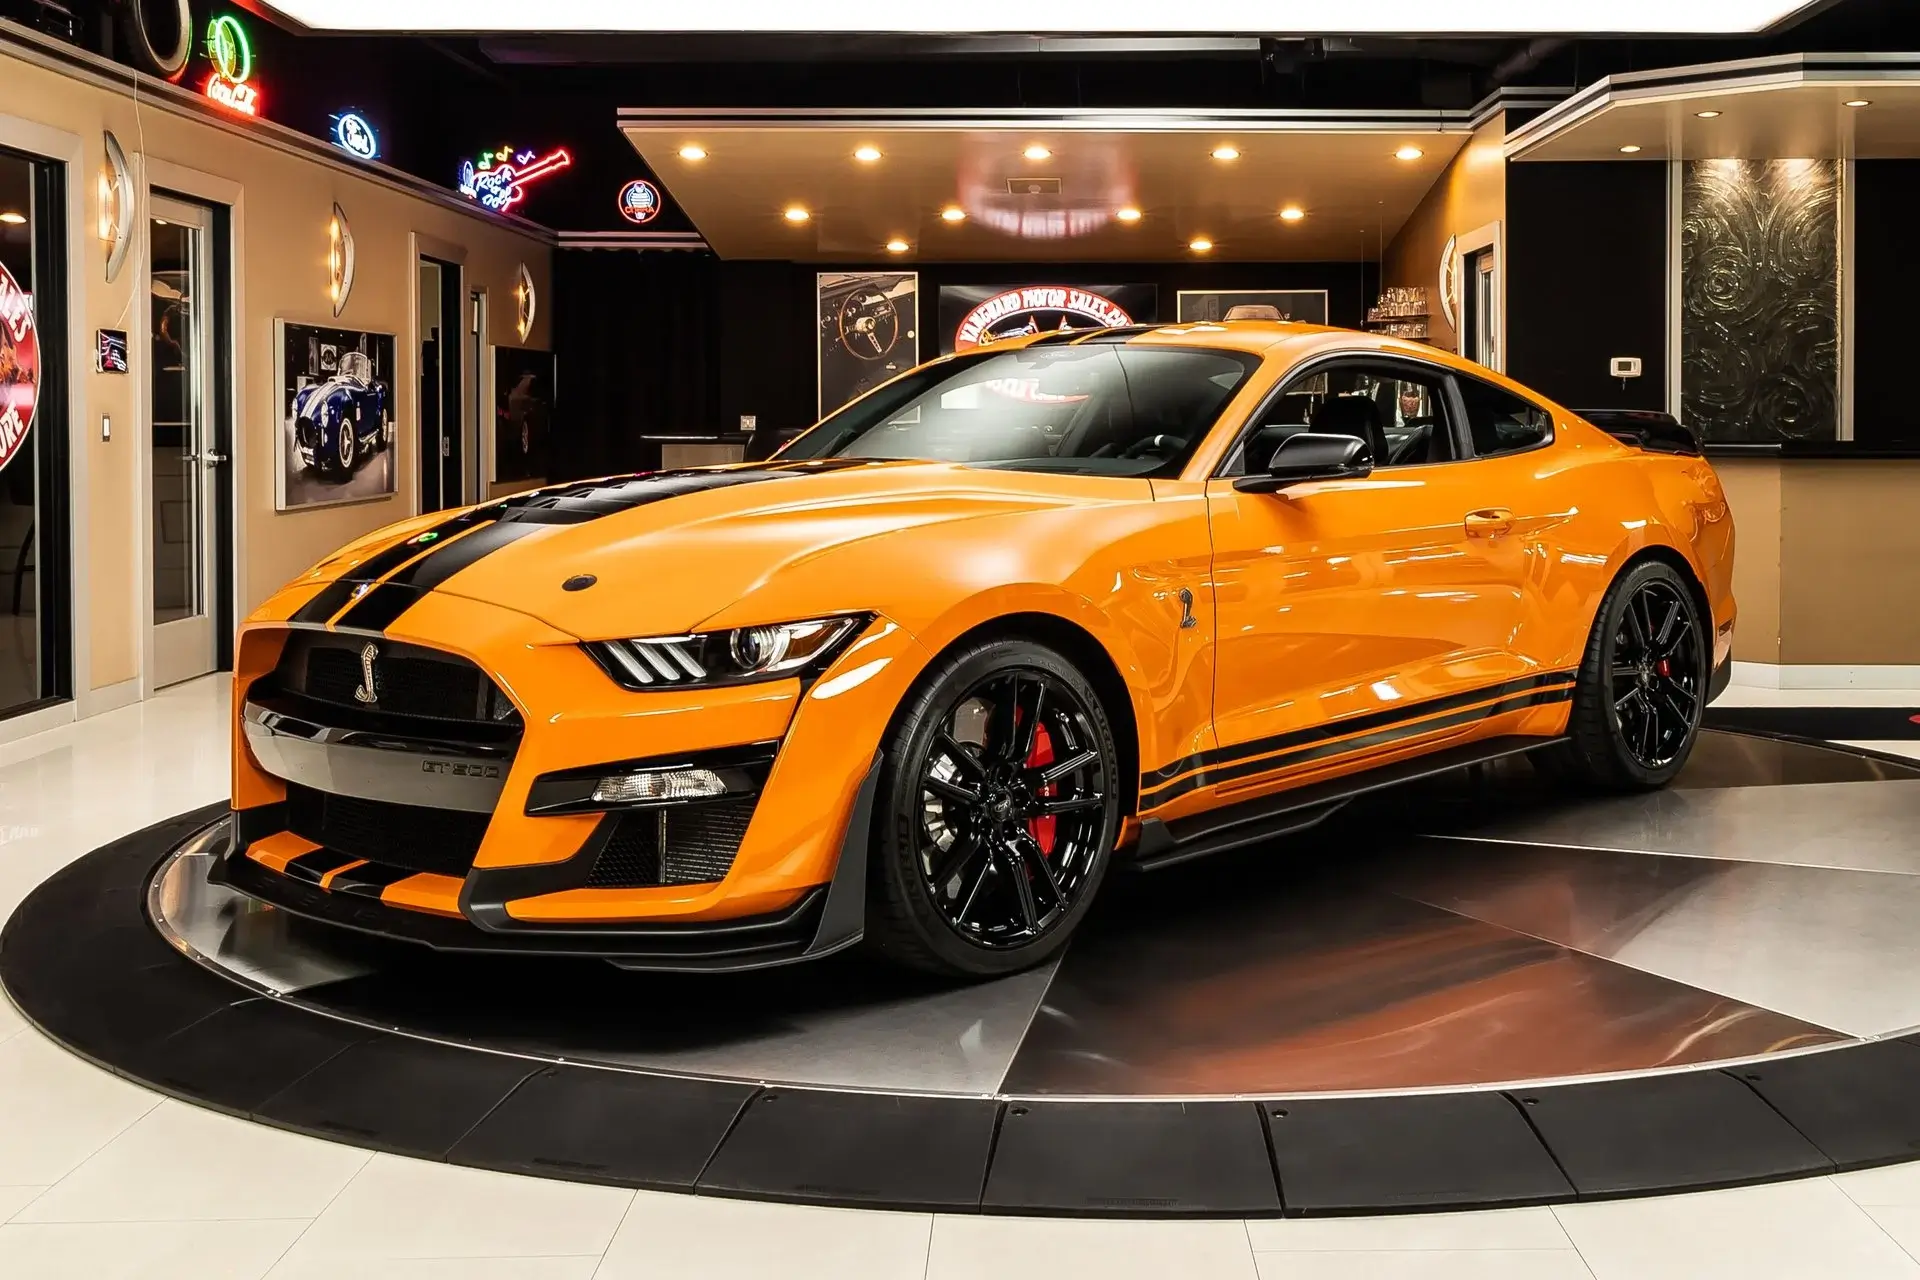 Evolution of the Shelby Mustang GT500 